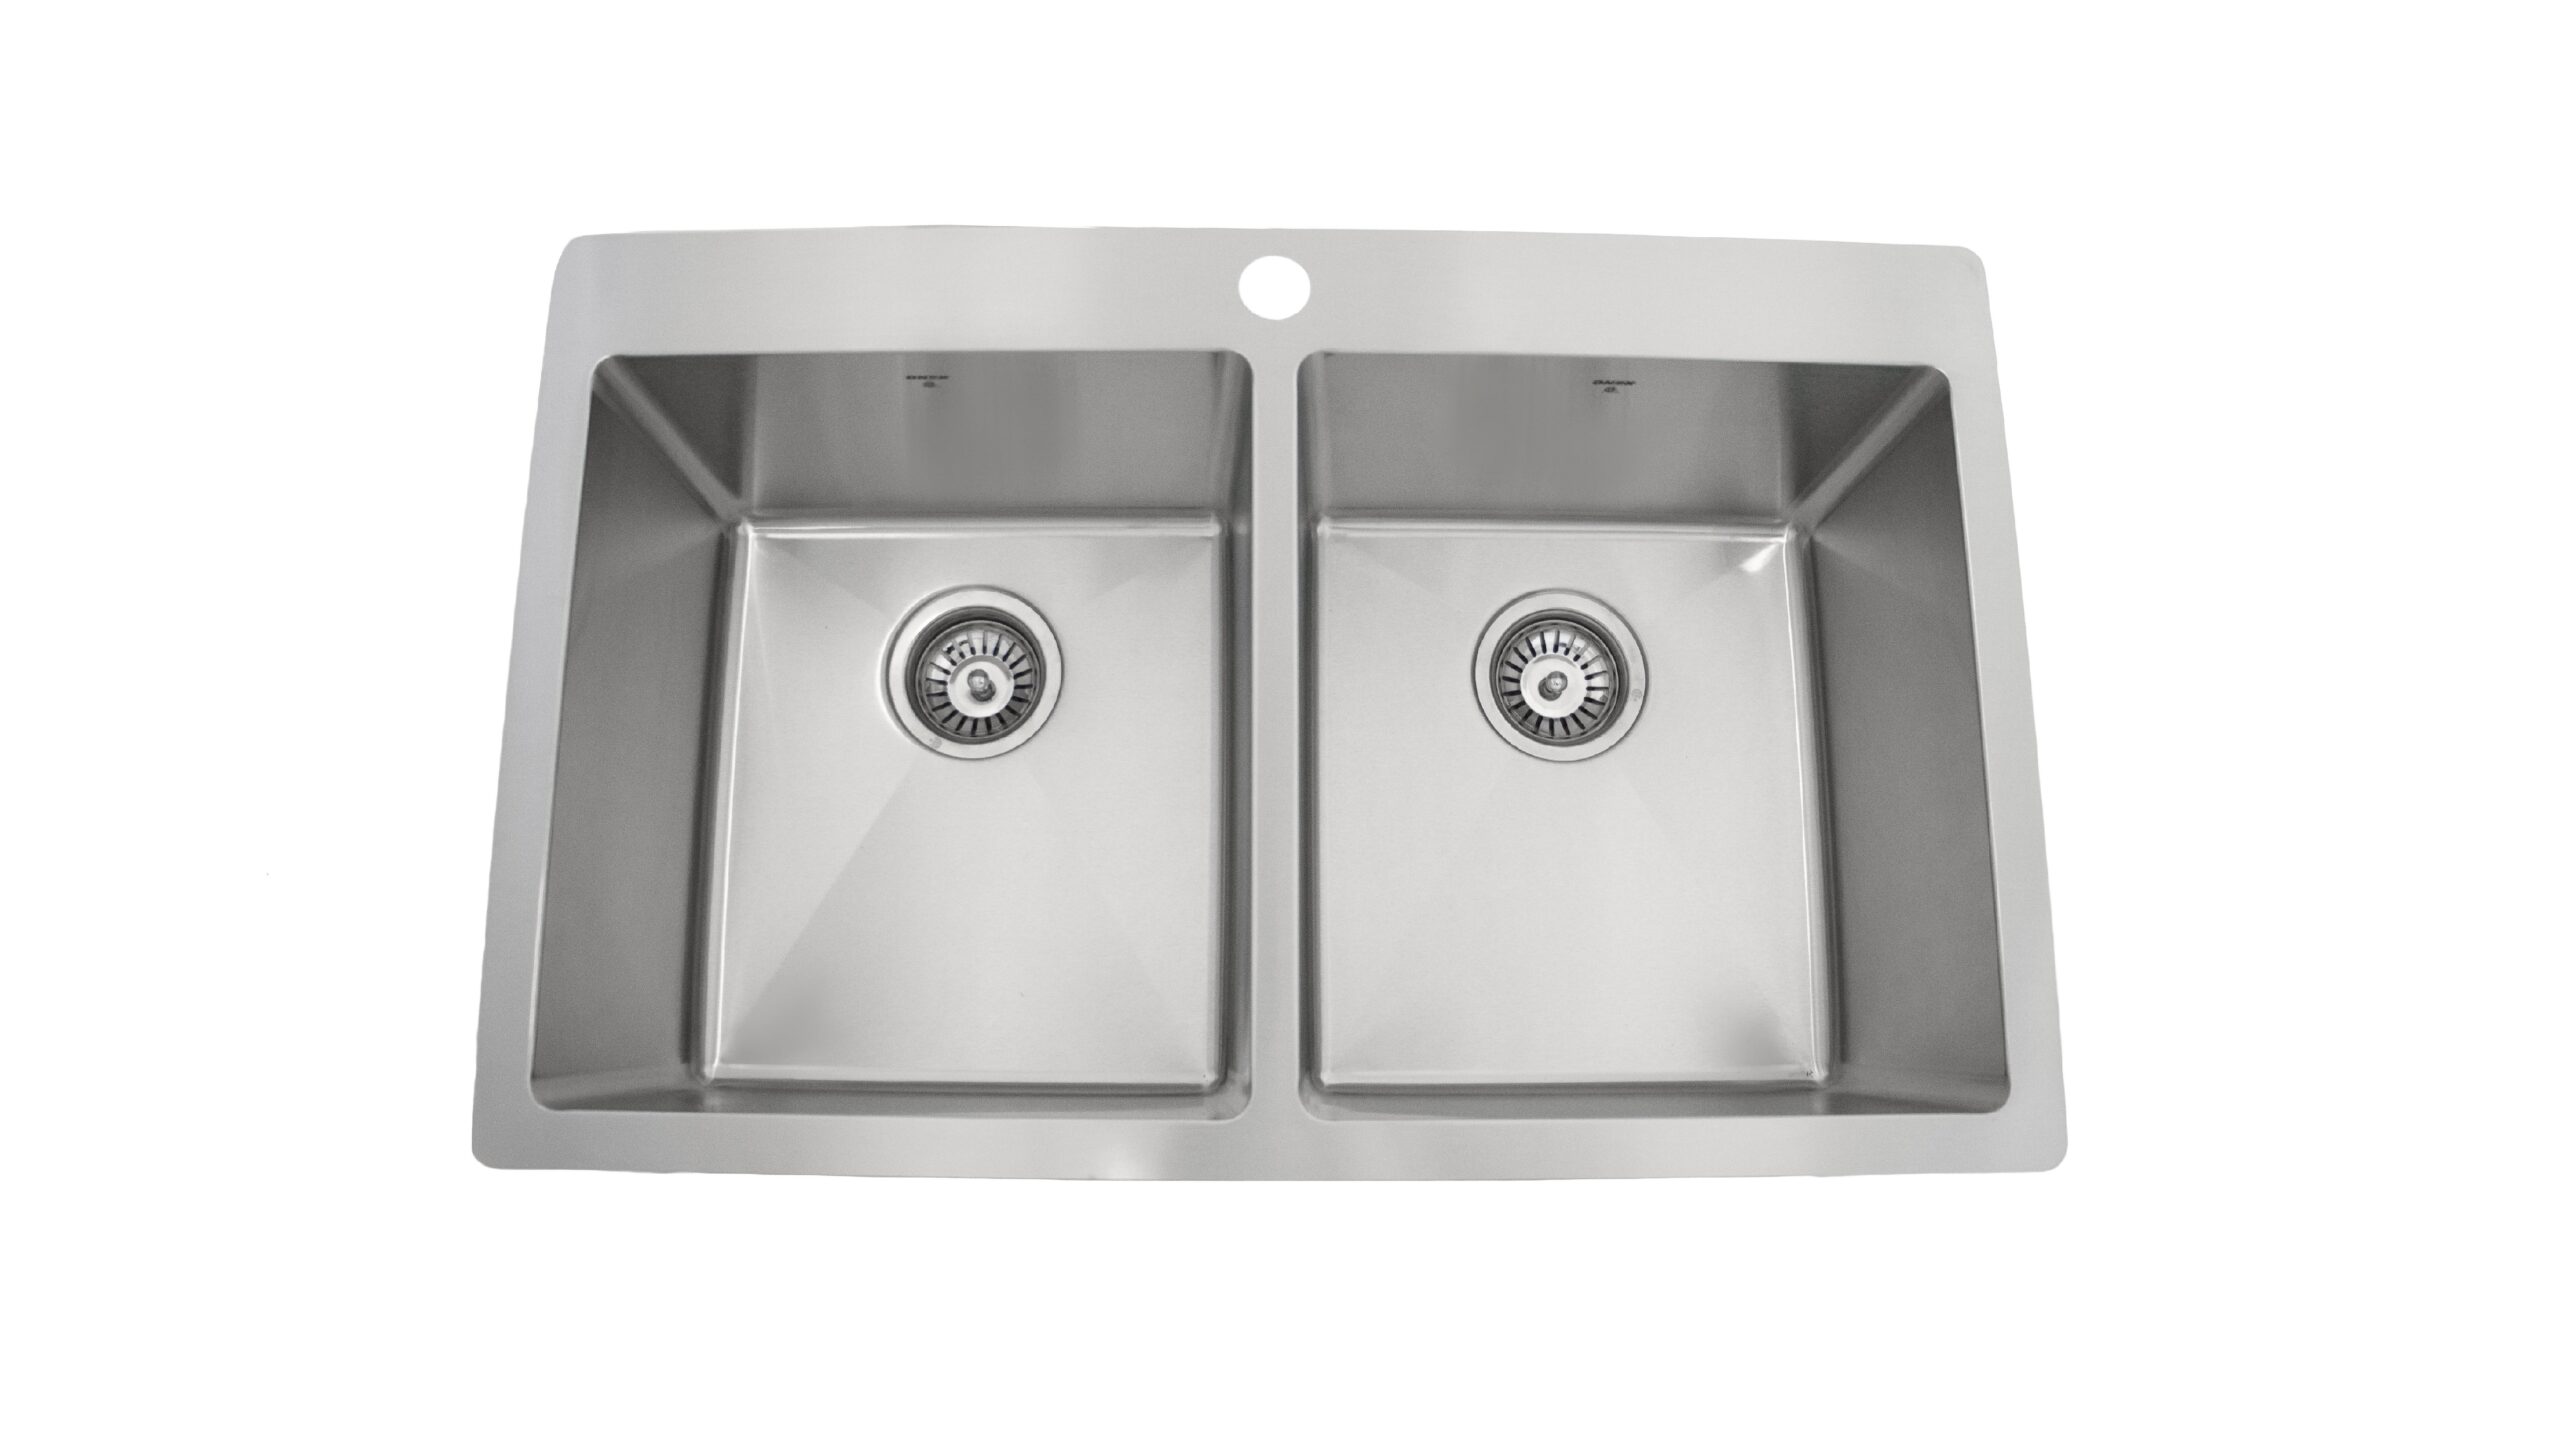 OD3120 SQR, Double Bowl, Onex Enterprises, Stainless Steel, Designer Collection, Drop In, Kitchen Sink in Canada